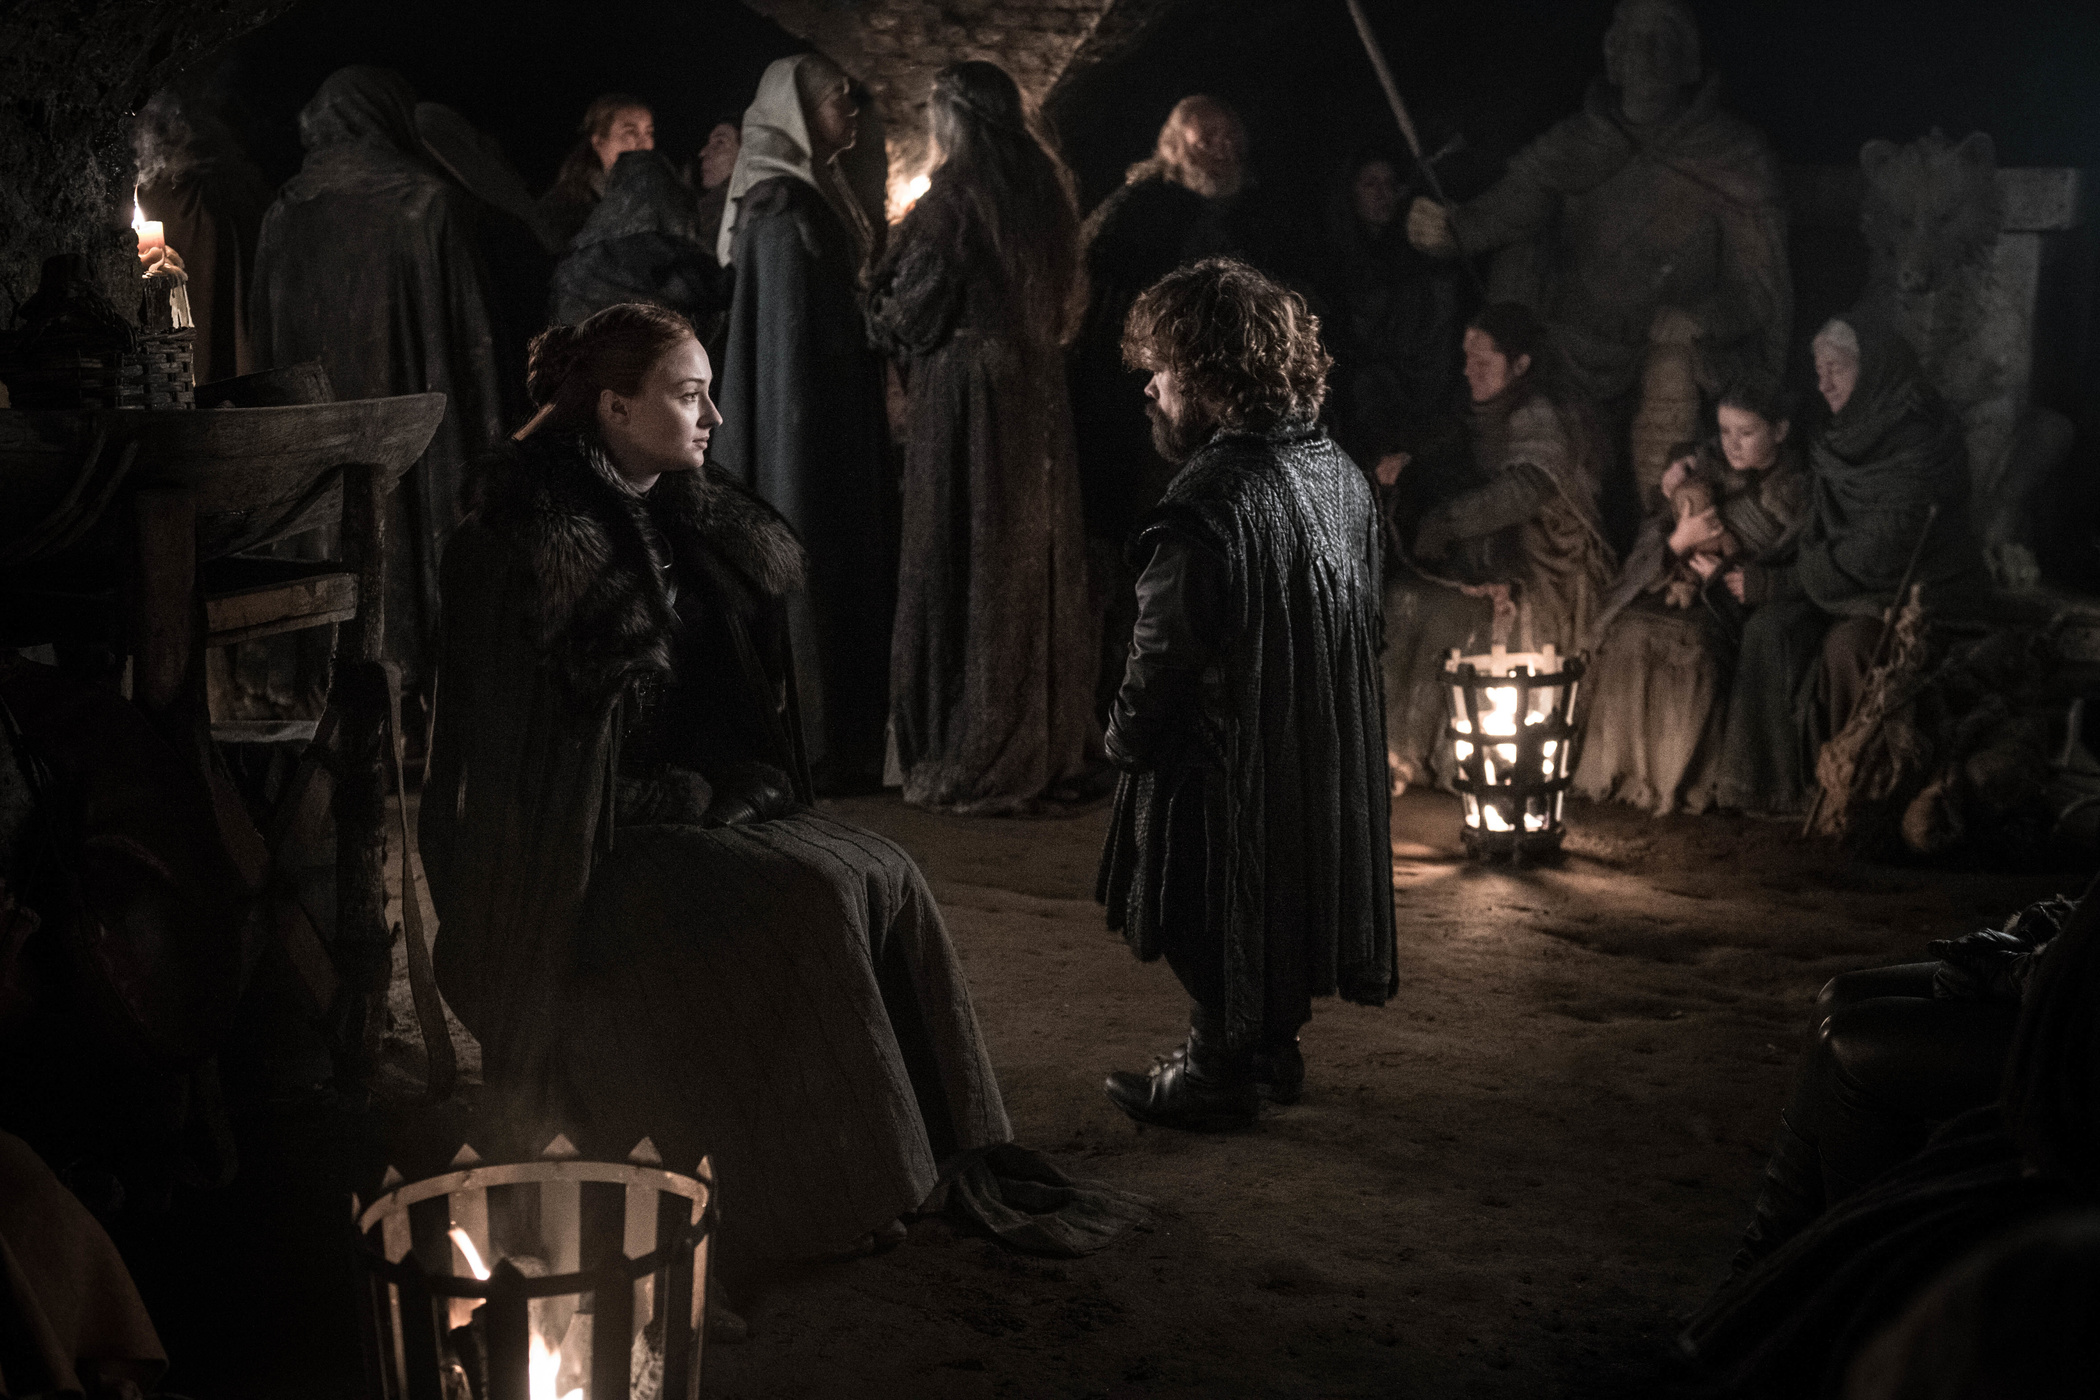 Sansa Stark chooses the crypts for the Battle of Winterfell